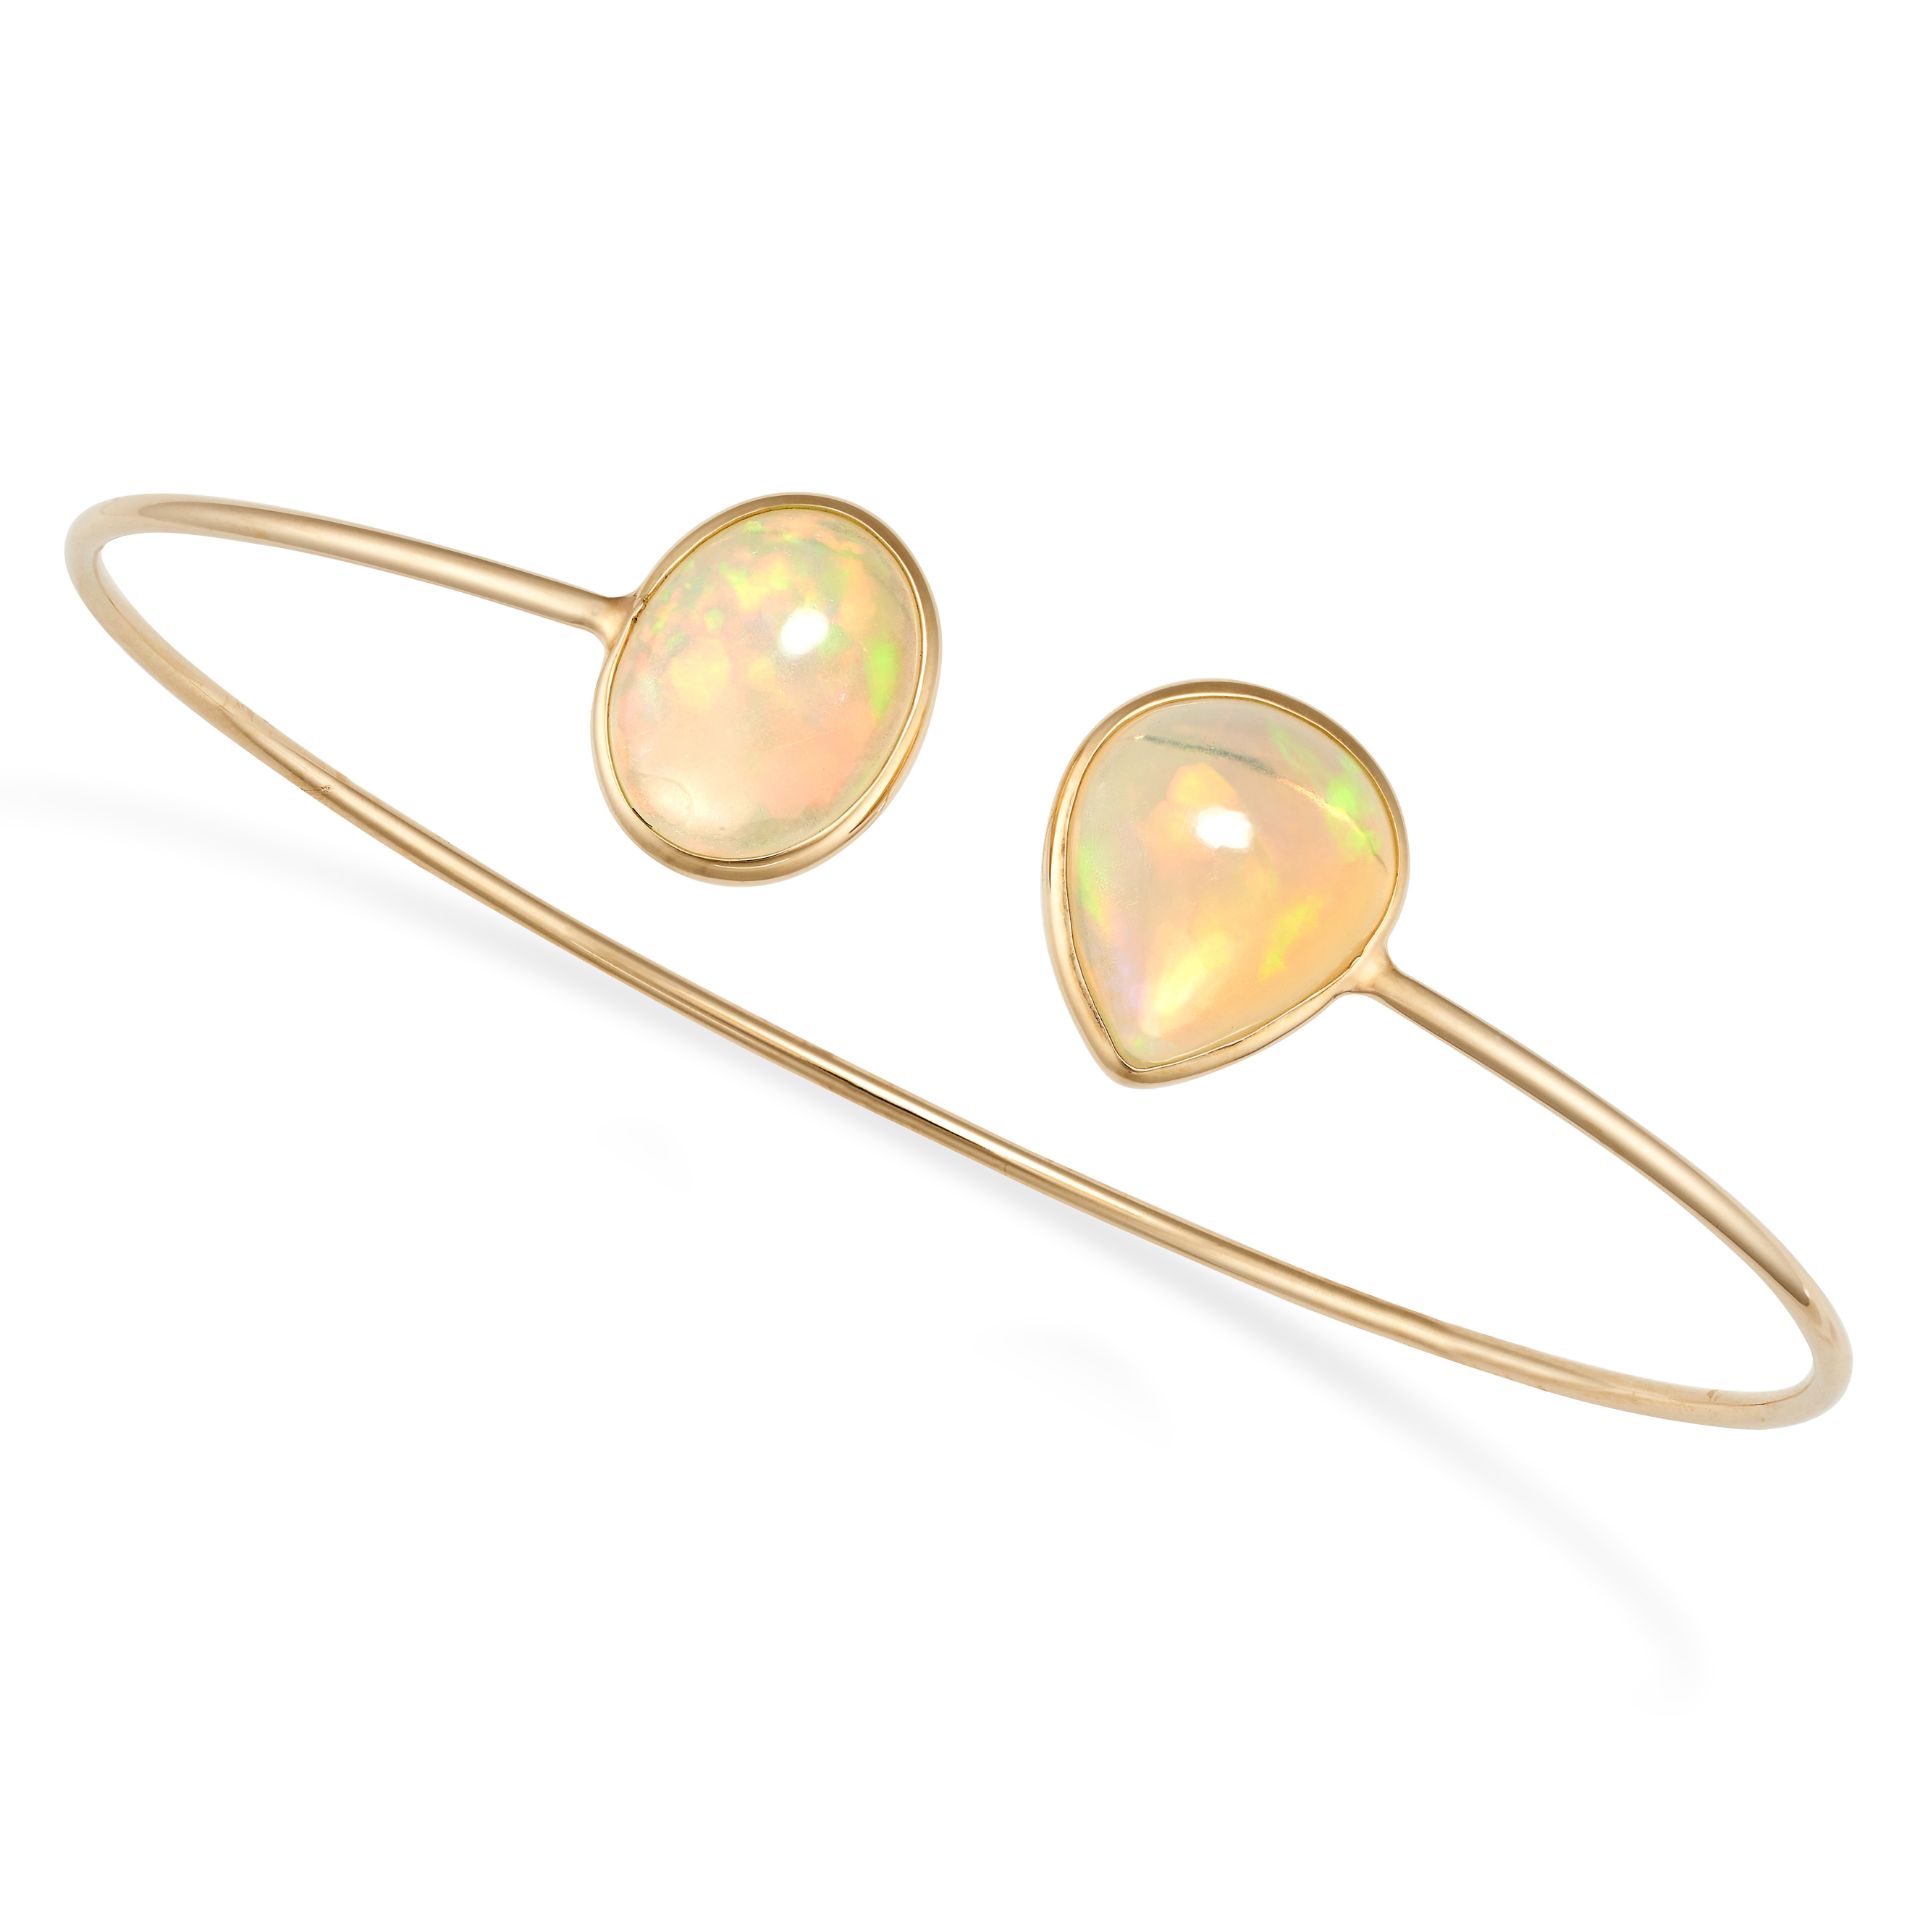 AN OPAL BANGLE in 18ct yellow gold, designed as an open cuff terminated at each end with an oval ...